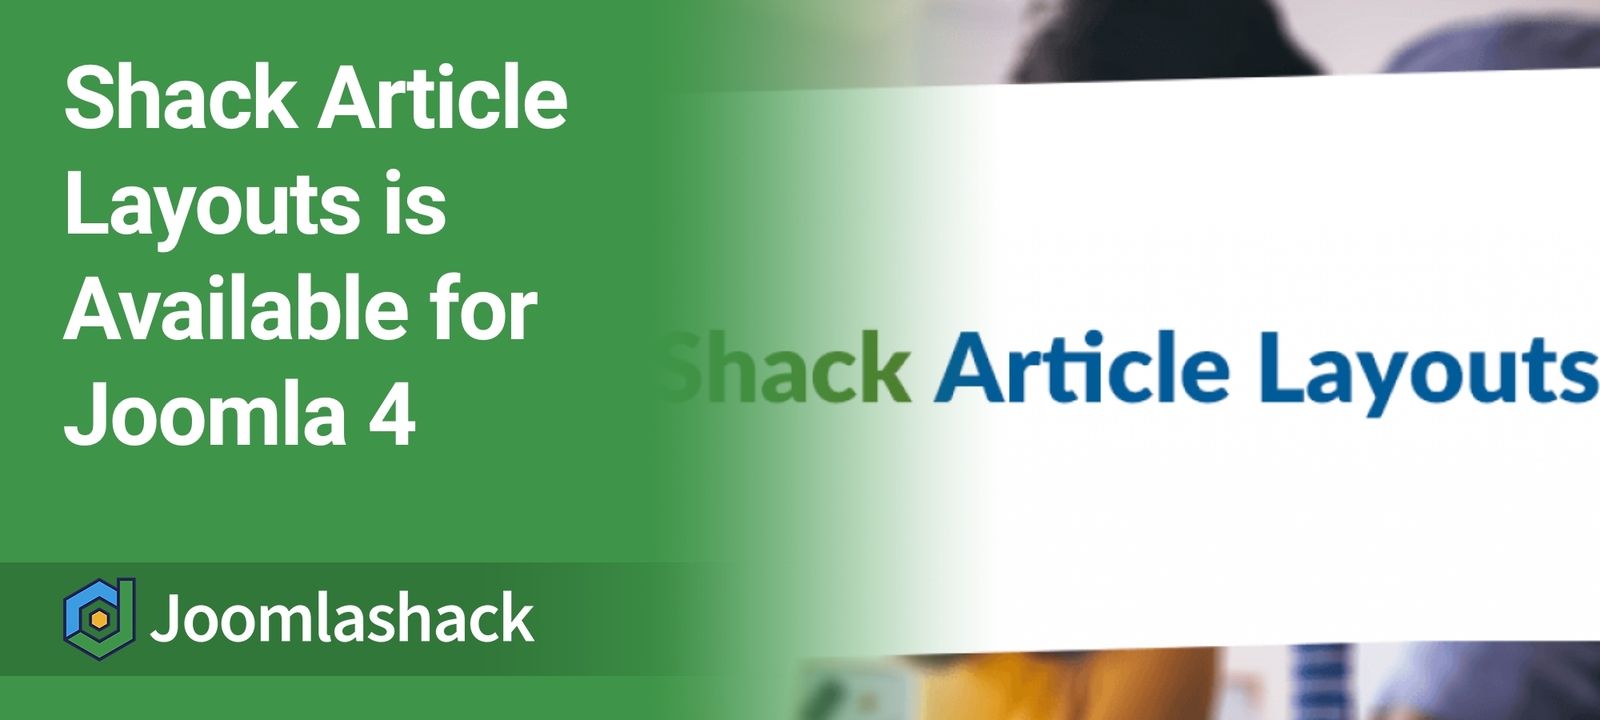 Shack Article Layouts is Ready for Joomla 4